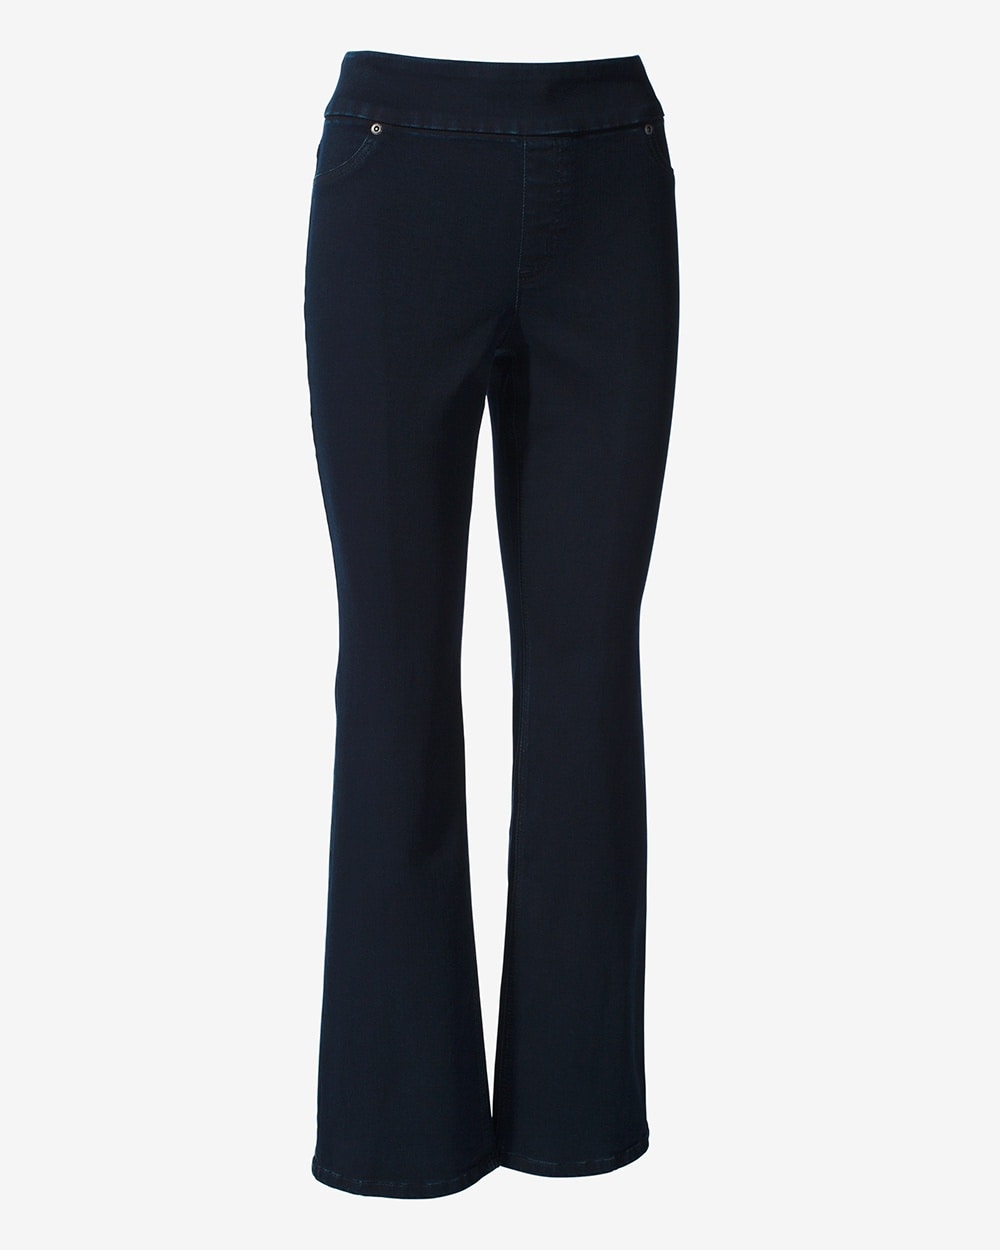 Perfect Stretch Nicky Bootcut Jeans